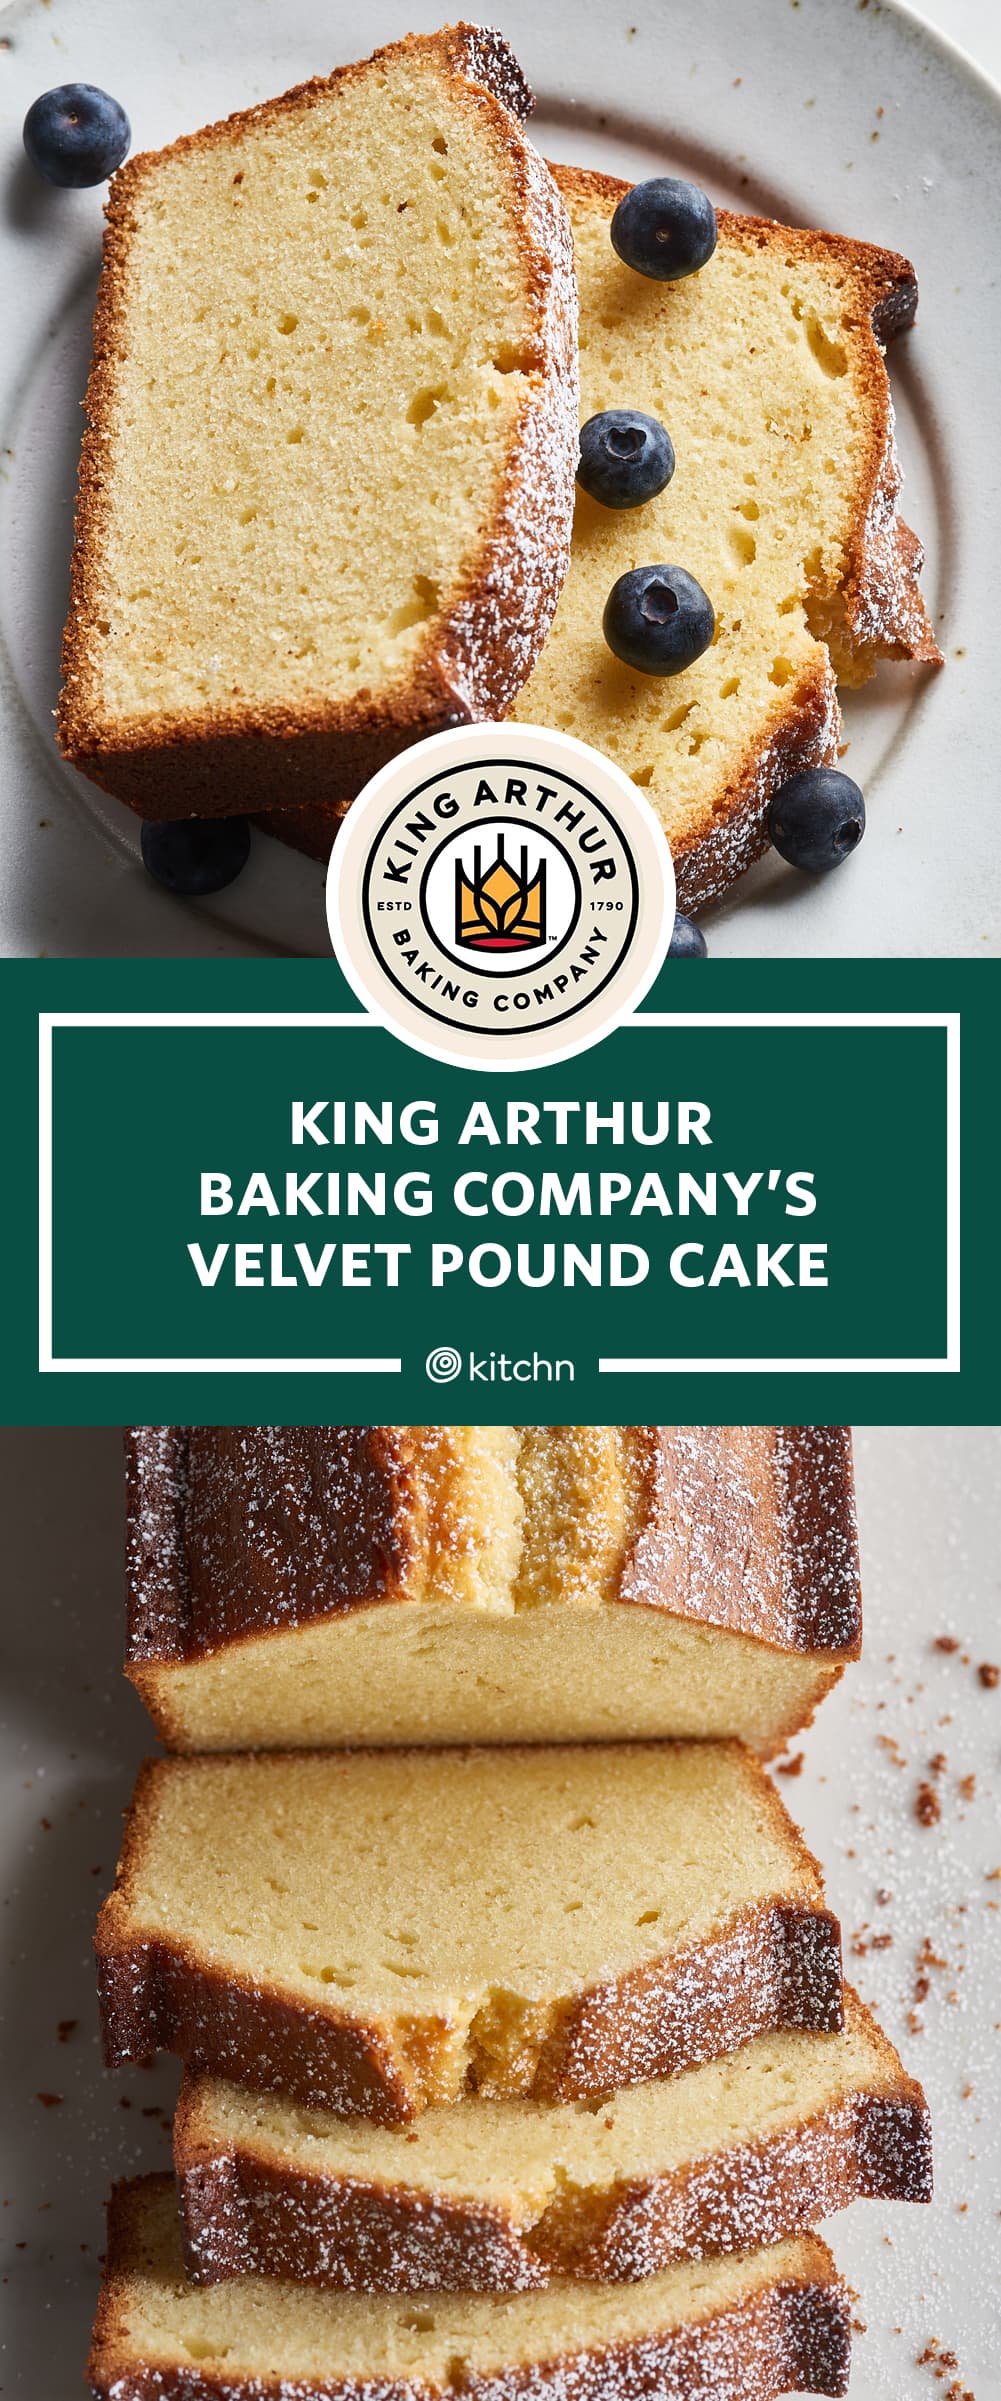 Time to Replace Your Pan Set - King Arthur Baking Company